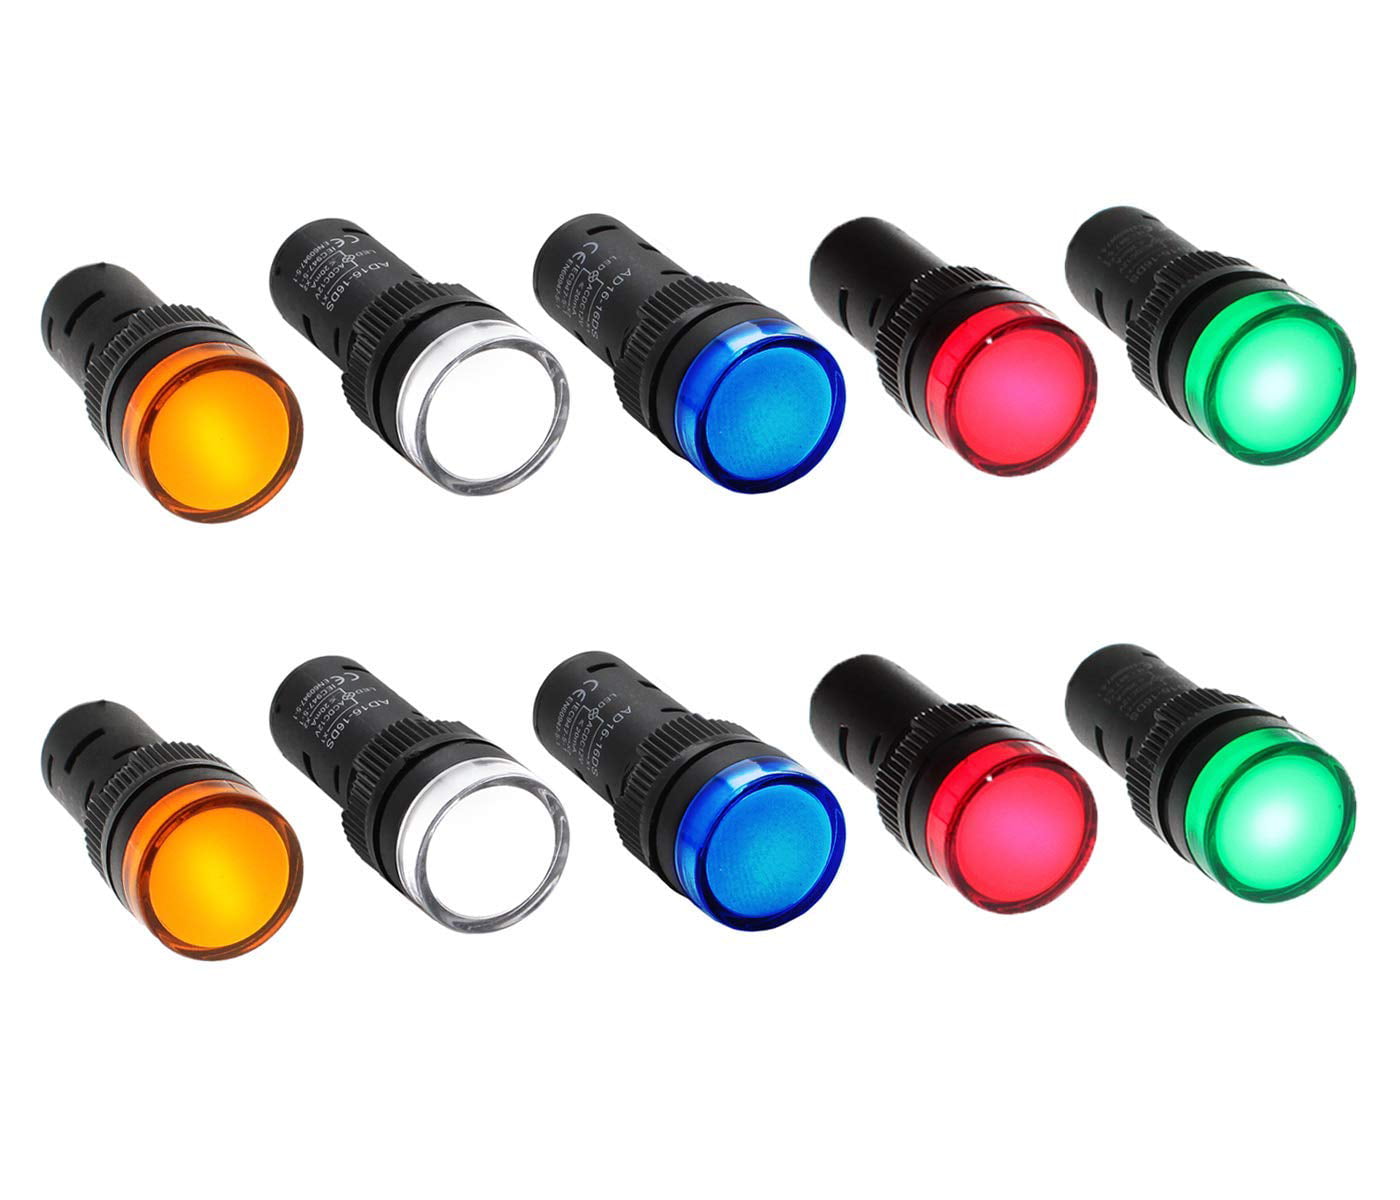 Shopcorp 16mm Energy Saving LED Indicator Lights -2 Blue, 2 White, 2 Yellow, 2 Green and 2 Red Bulbs for Industrial Equipment and Mount Panels in Operating Rooms and Distribution Boxes,